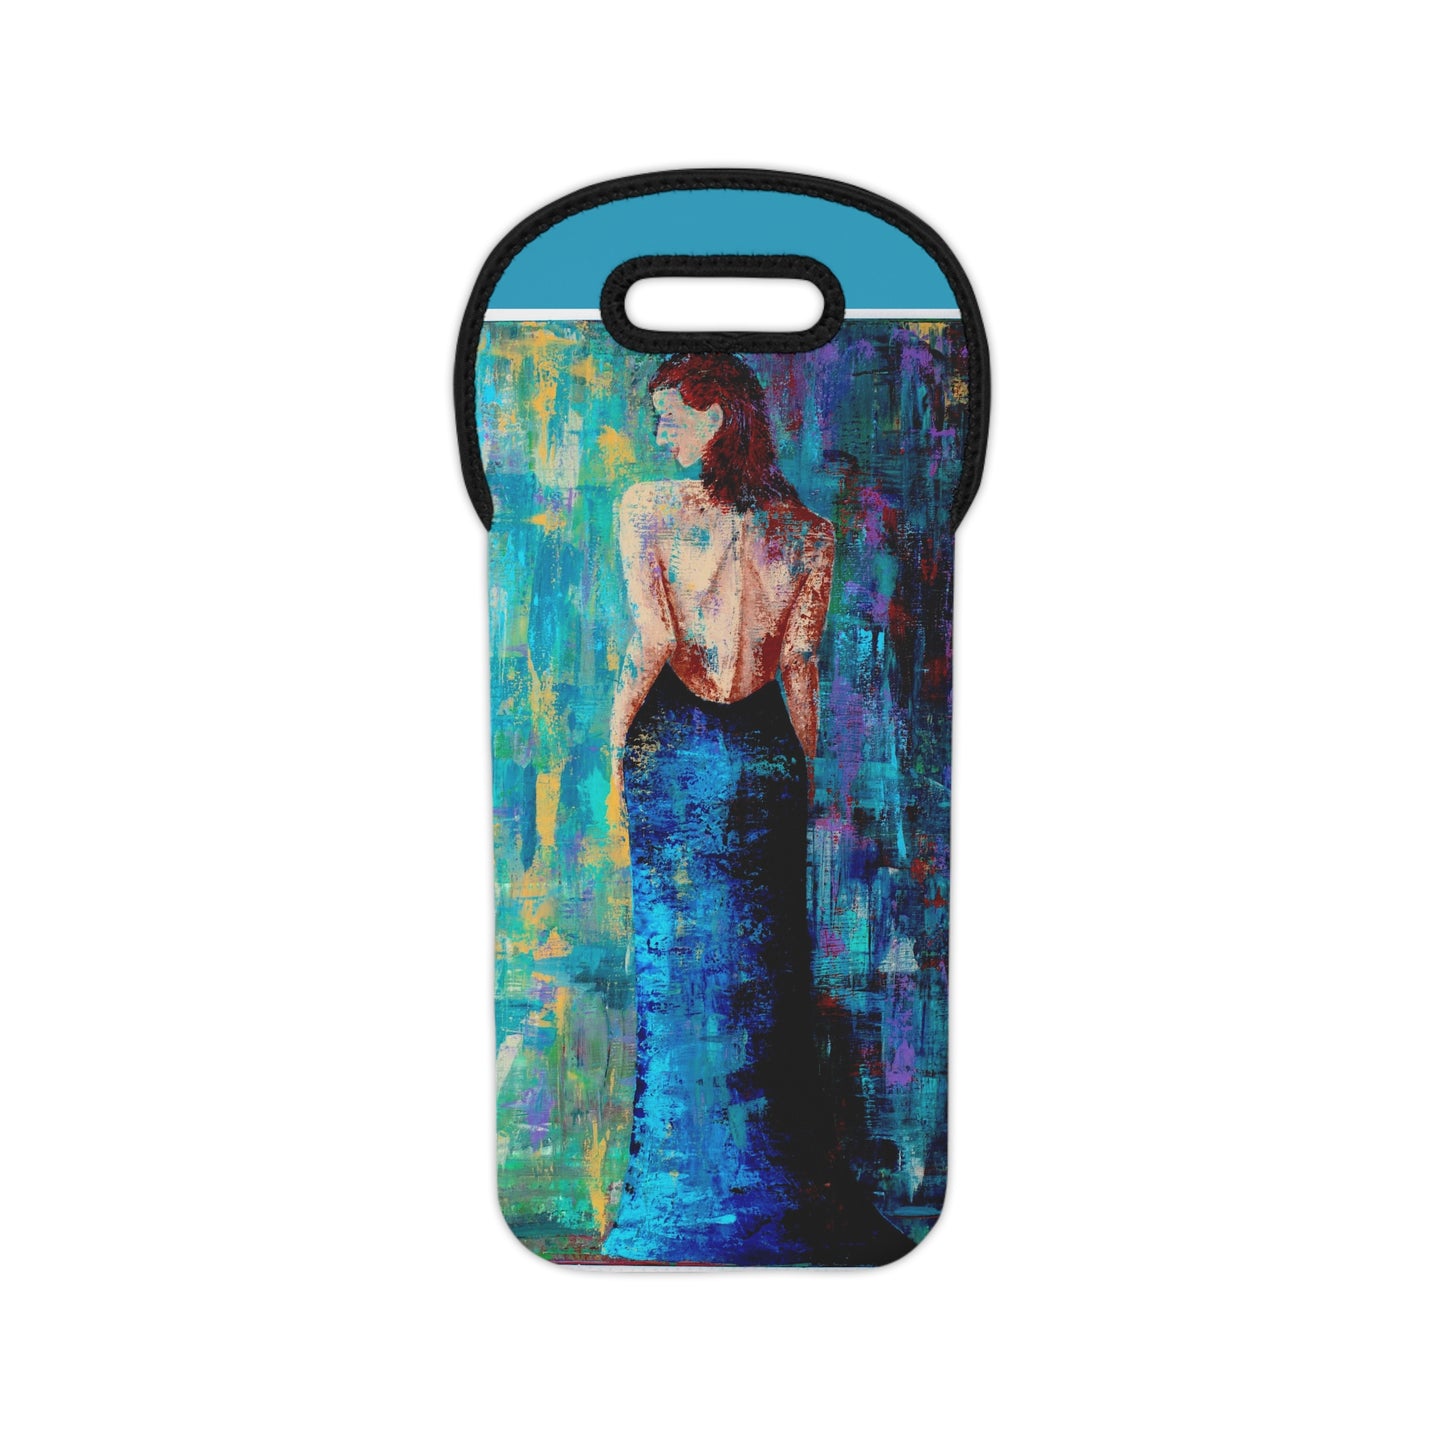 Lady in Blue - Wine Carrier Bag